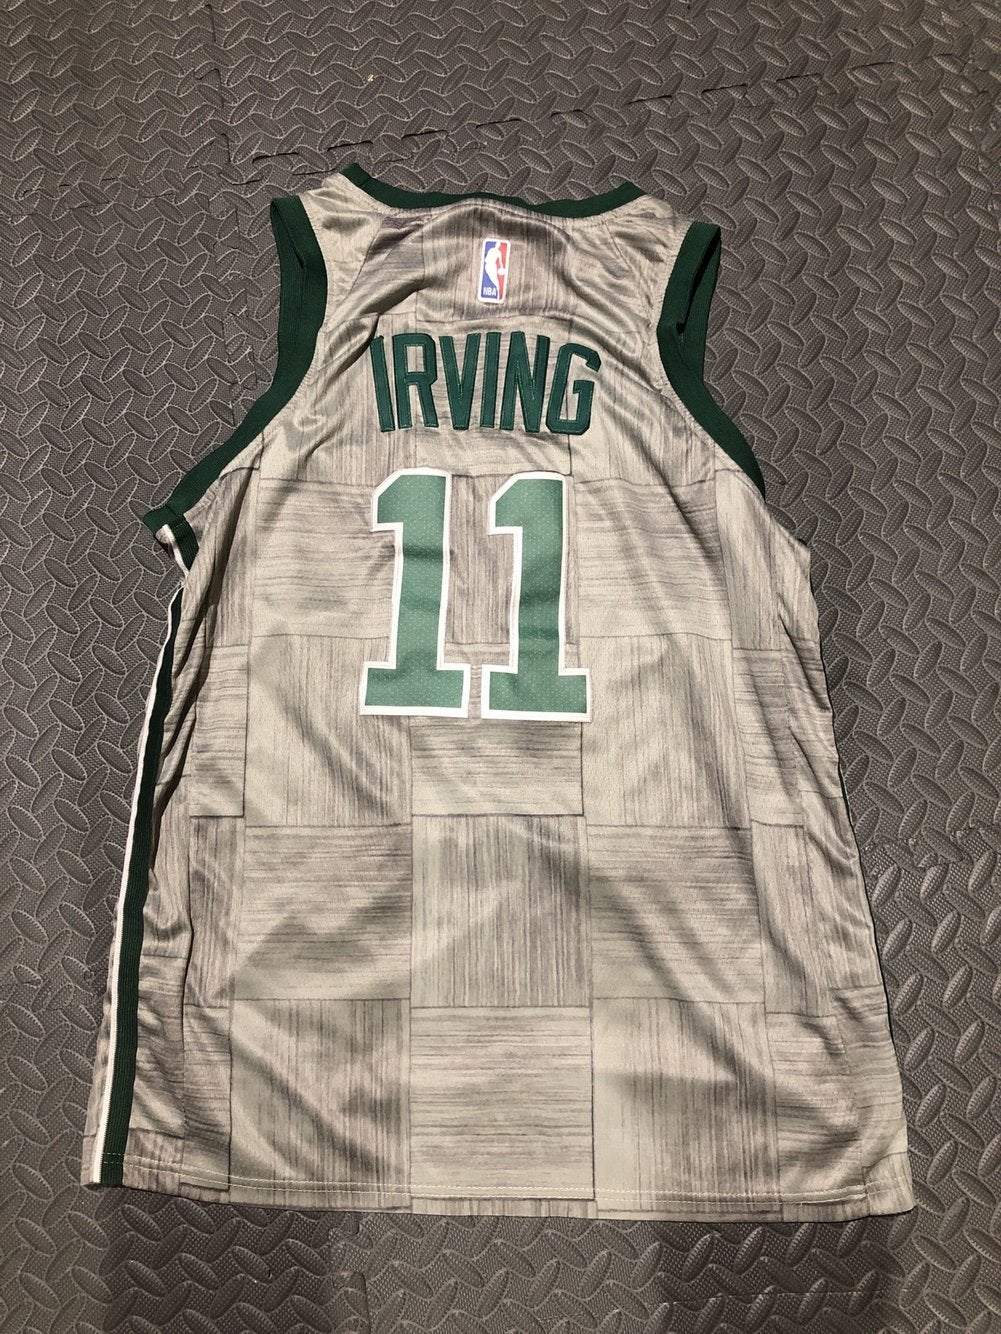 Kyrie Irving Gray NBA Jerseys for sale